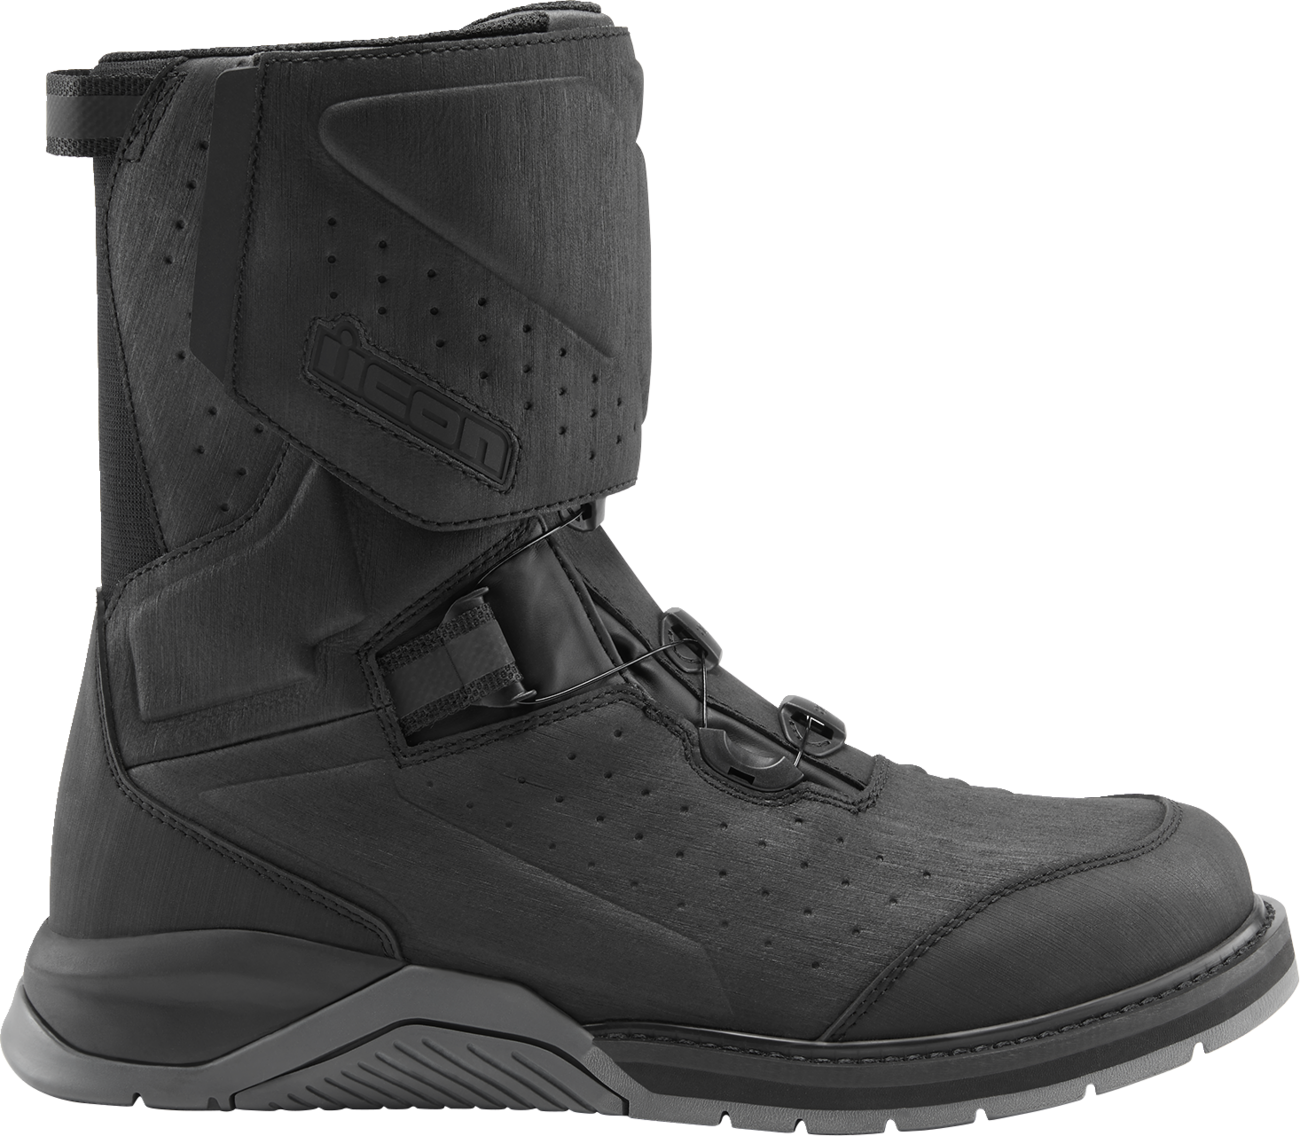 ICON Alcan Waterproof Boots - Black - Size 11 3403-1239